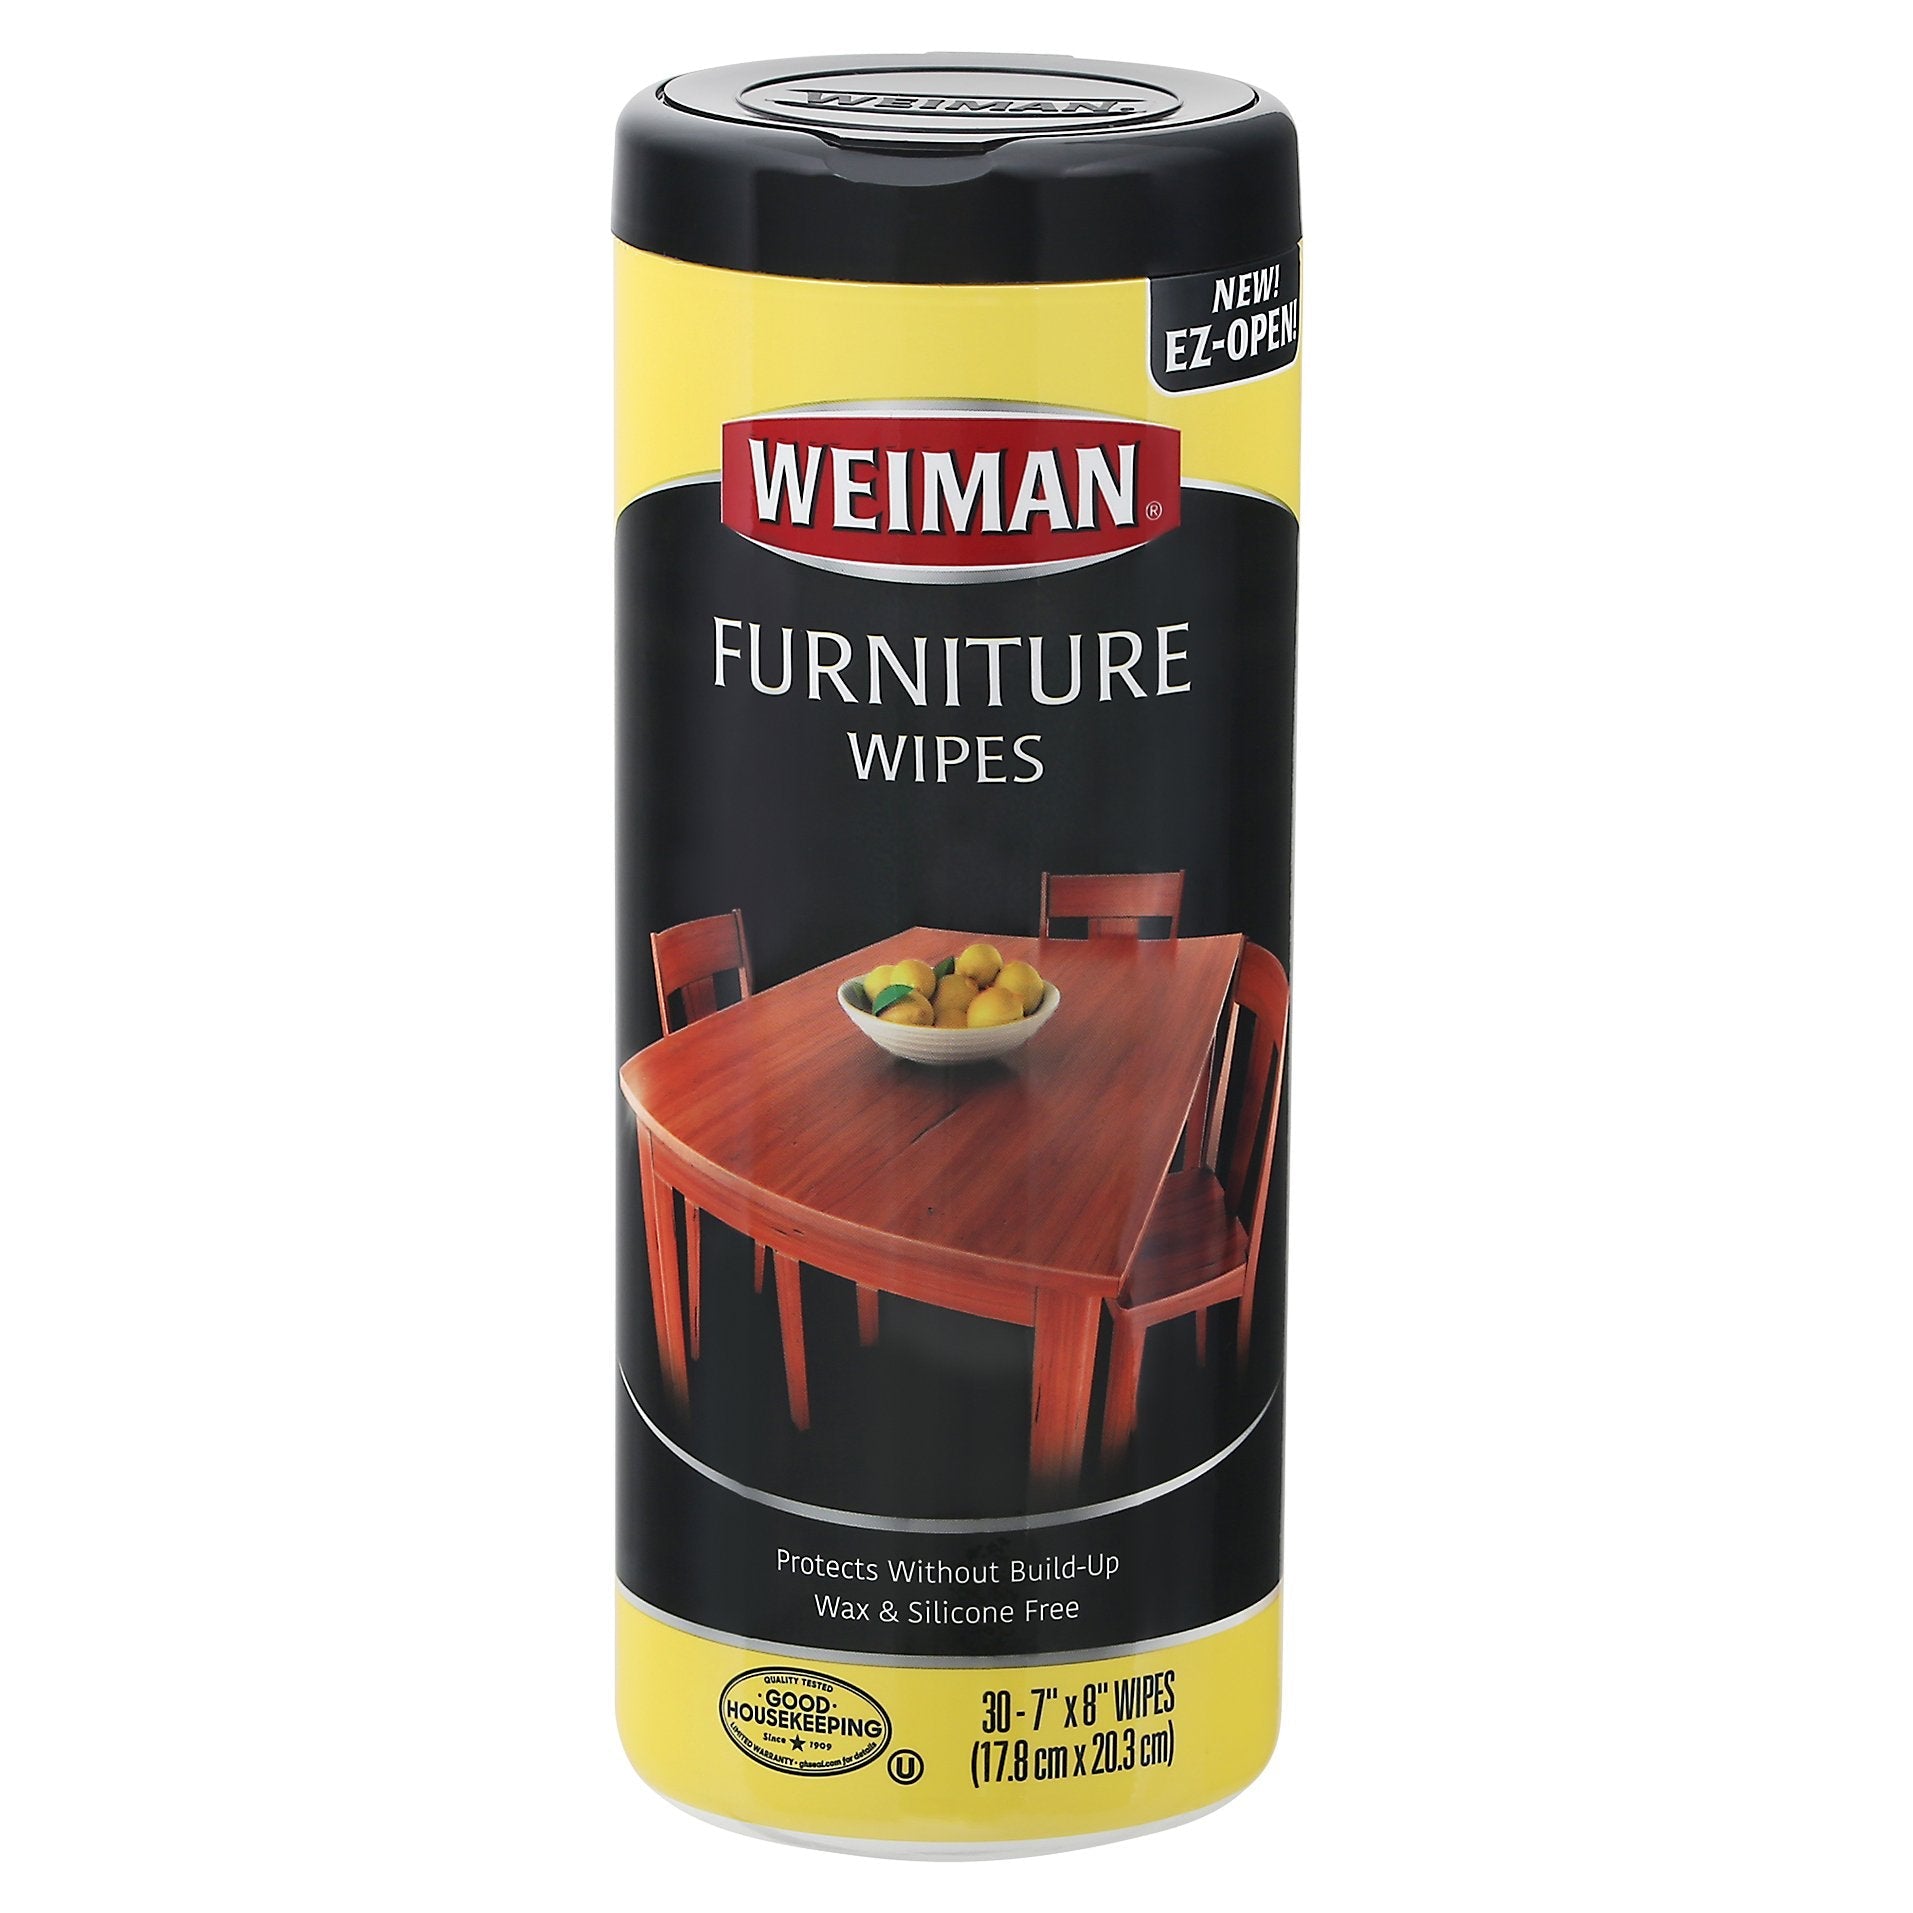 Weiman Stainless Steel Wipes (30 ct)